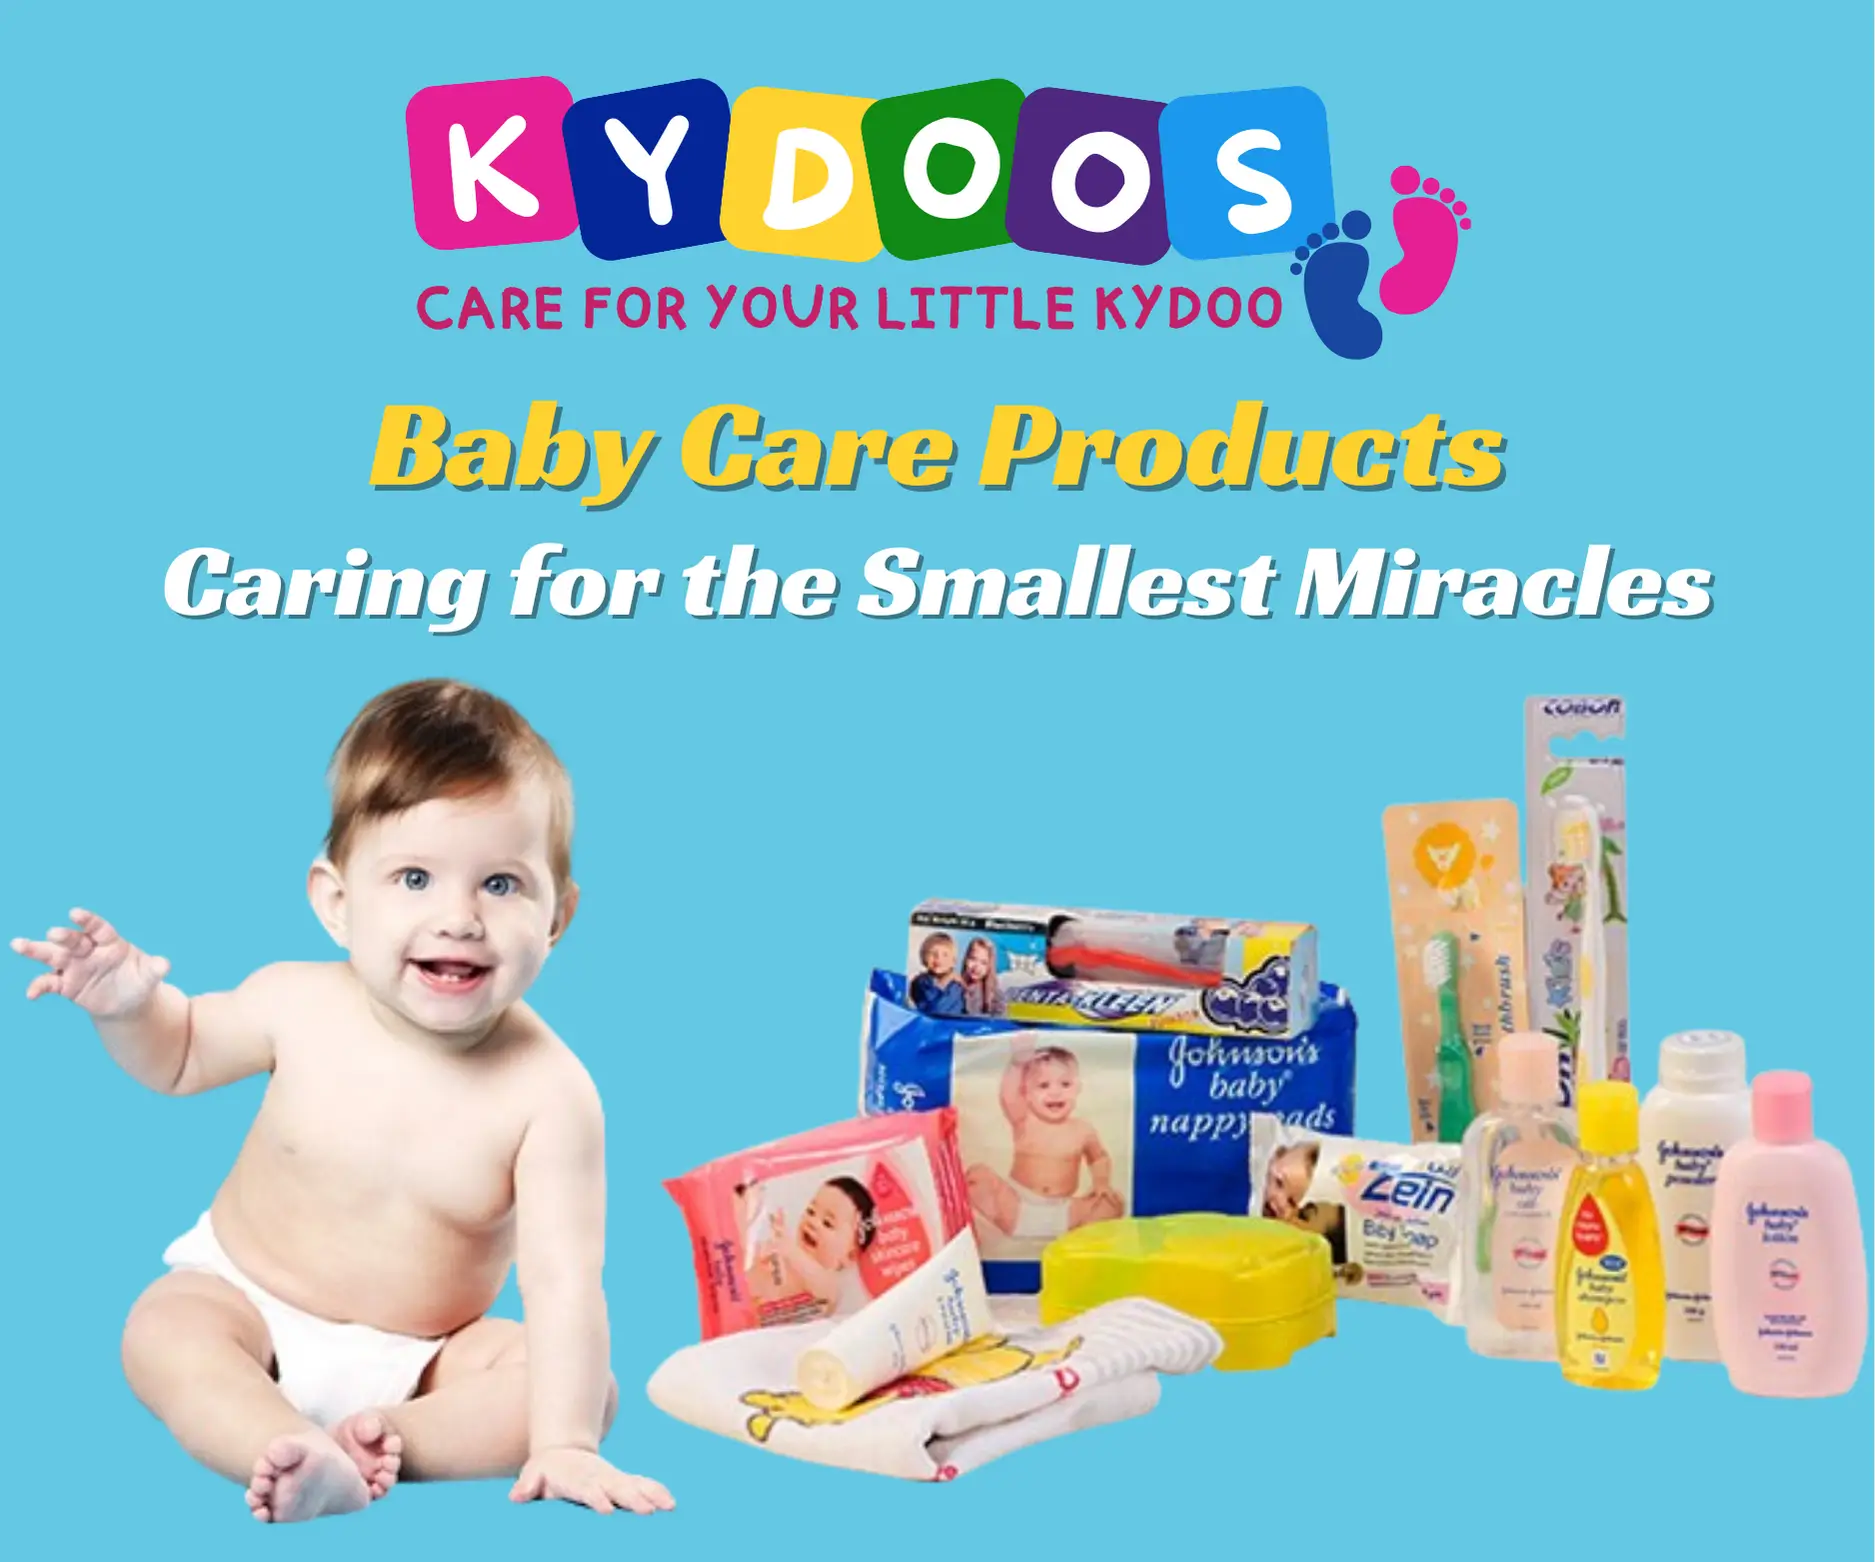 Kydoos Baby Care Products Mobile Banner